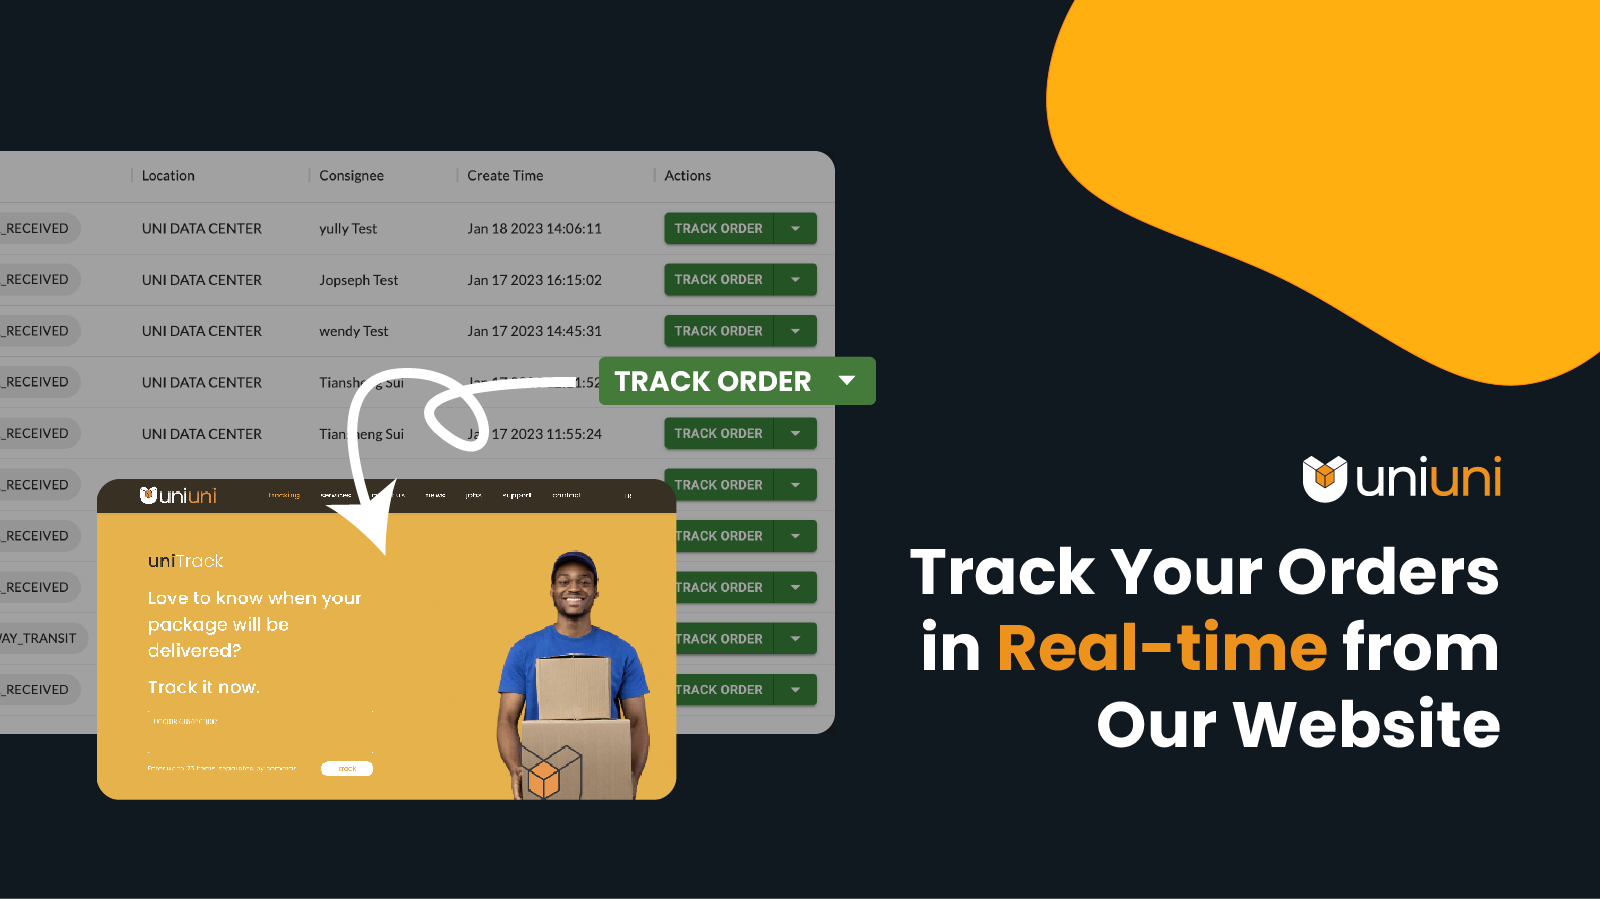 Track your orders in real-time from our website